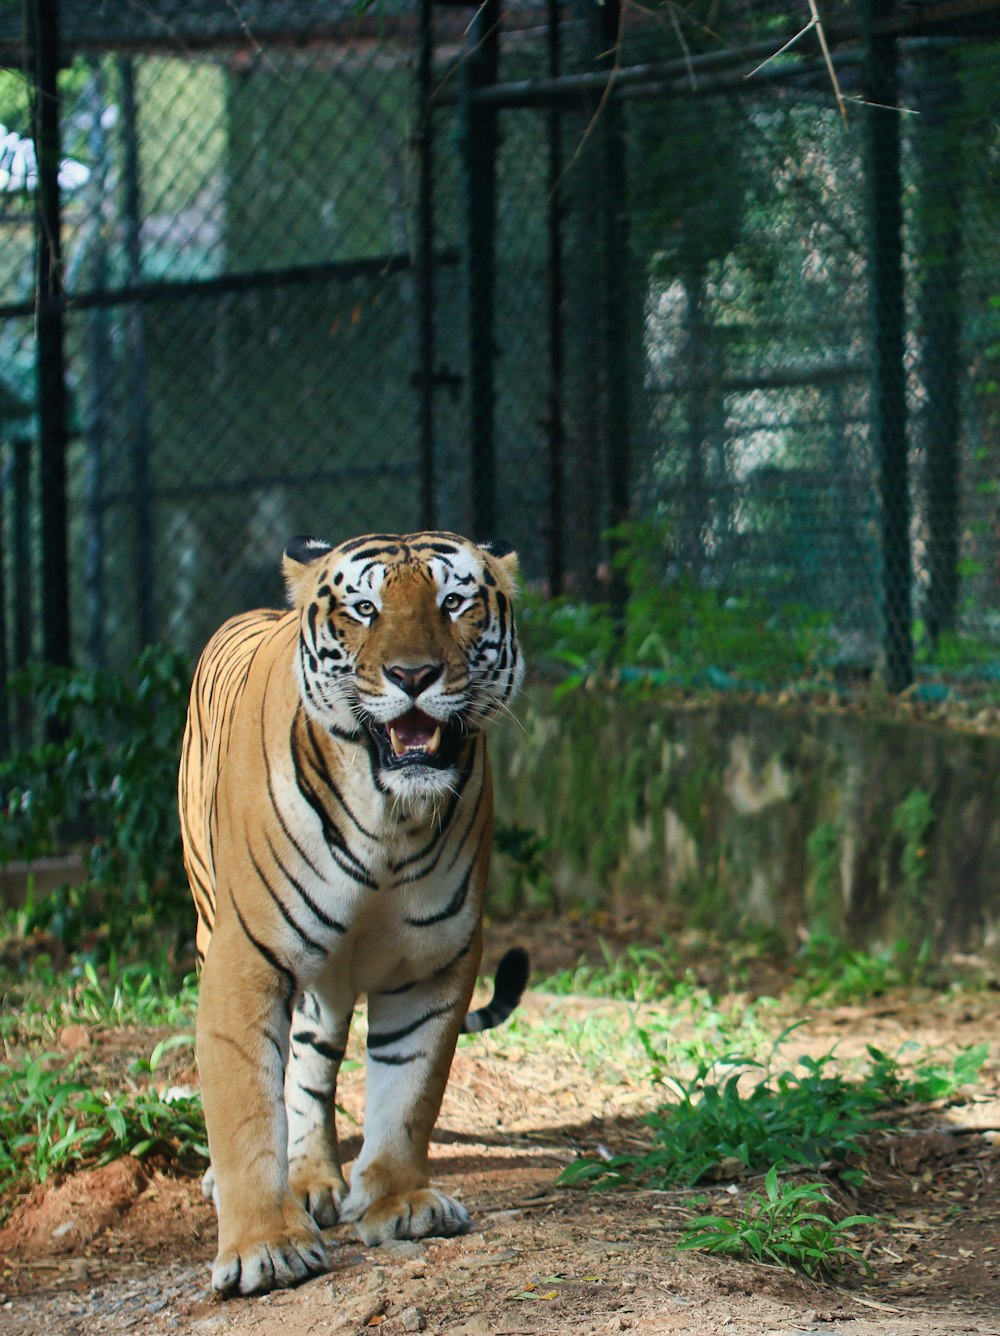 a tiger walking across a dirt field next to a fence